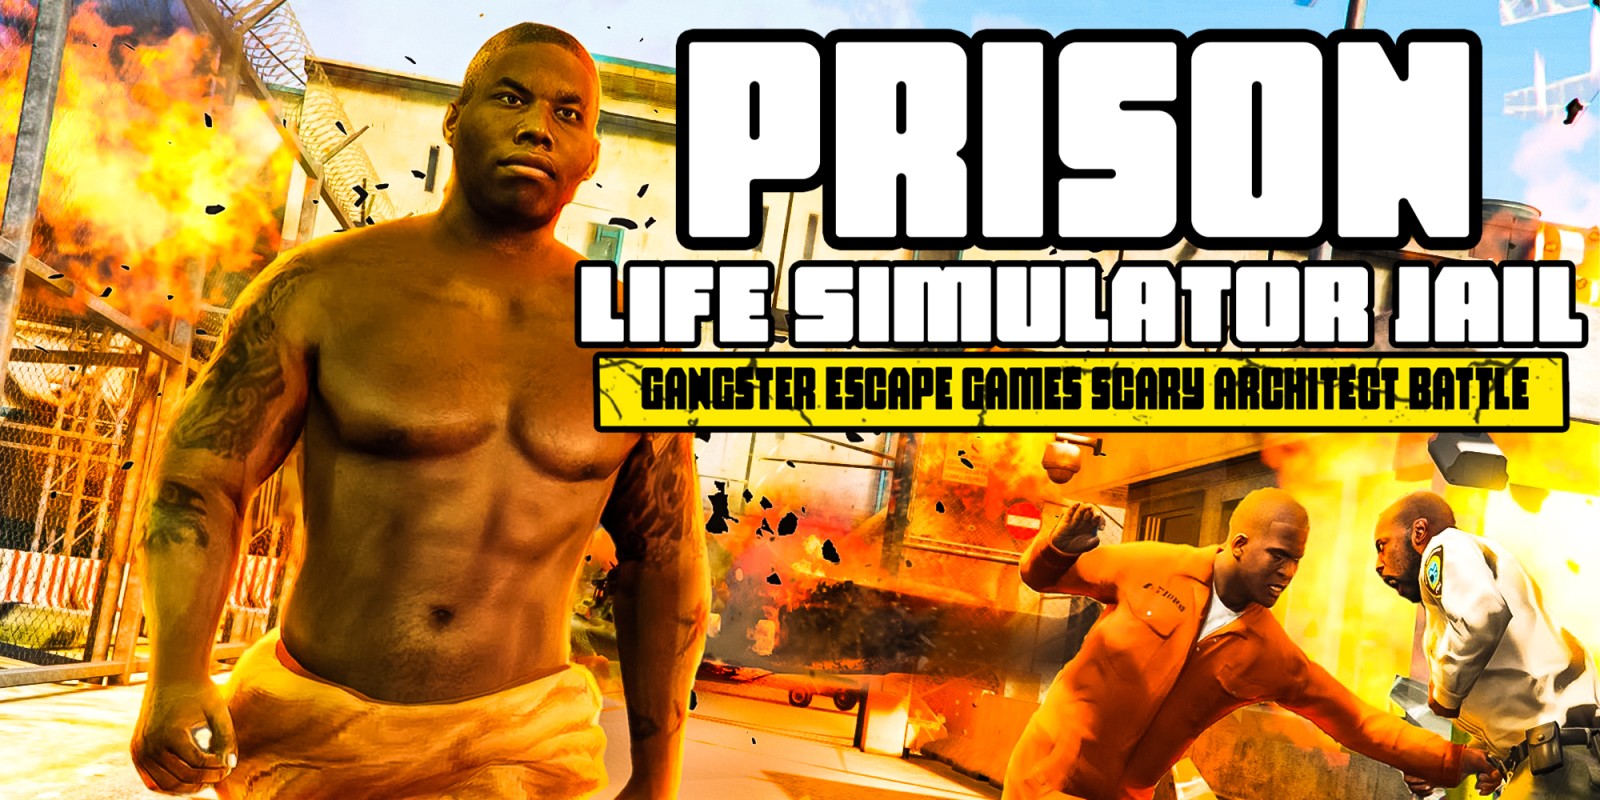 Prison Life Simulator Jail - Gangster Escape Games Scary